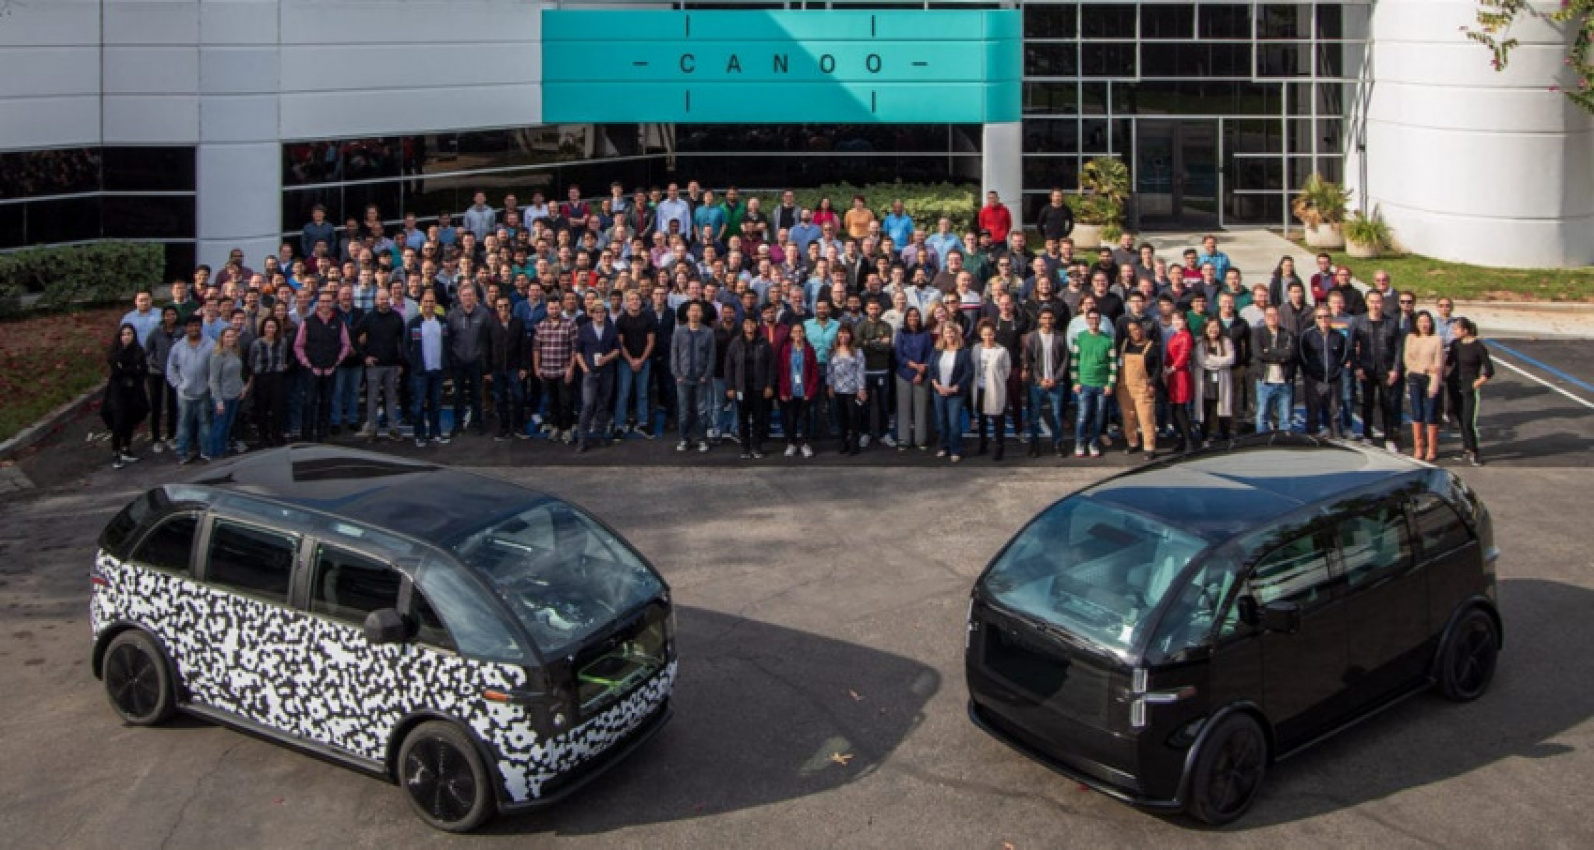 autos, cars, features, technology, canoo, jay leno, richard kim, new facts and new features of canoo’s canoo – a glimpse into a post-pandemic future